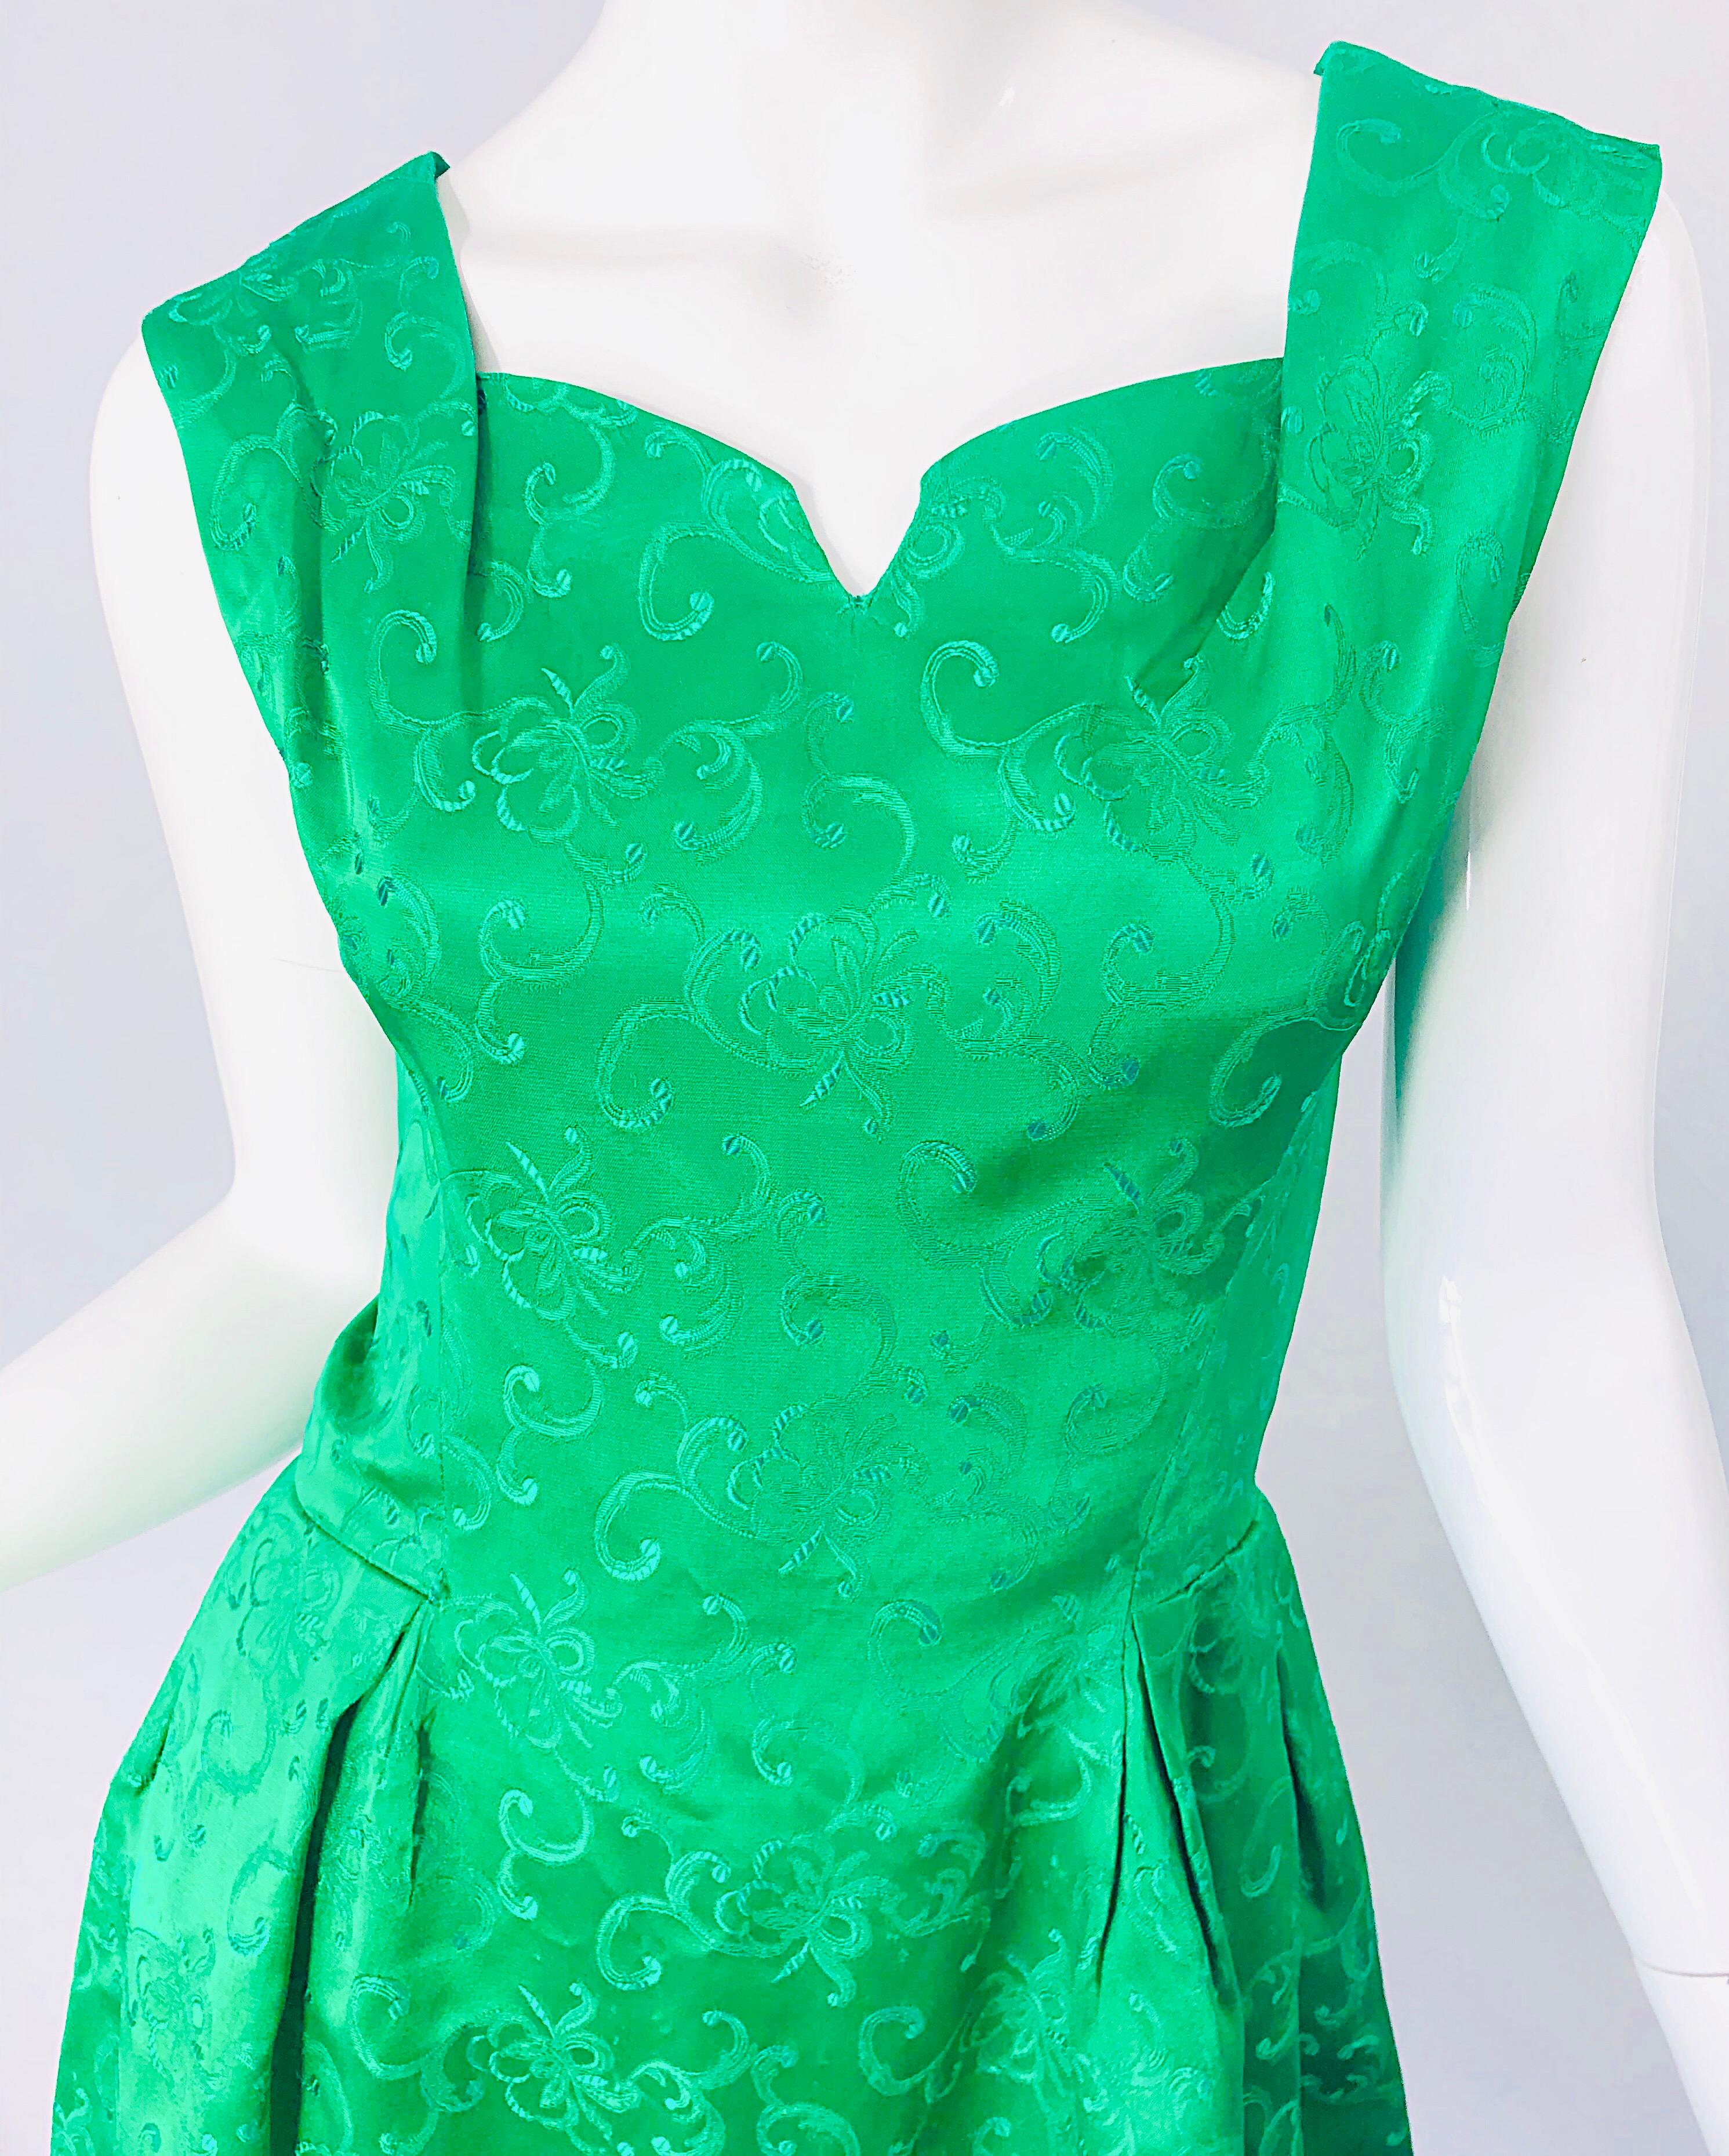 Chic 1960s Kelly Green Silk Damask Sleeveless Vintage 60s A-Line Dress In Excellent Condition For Sale In San Diego, CA